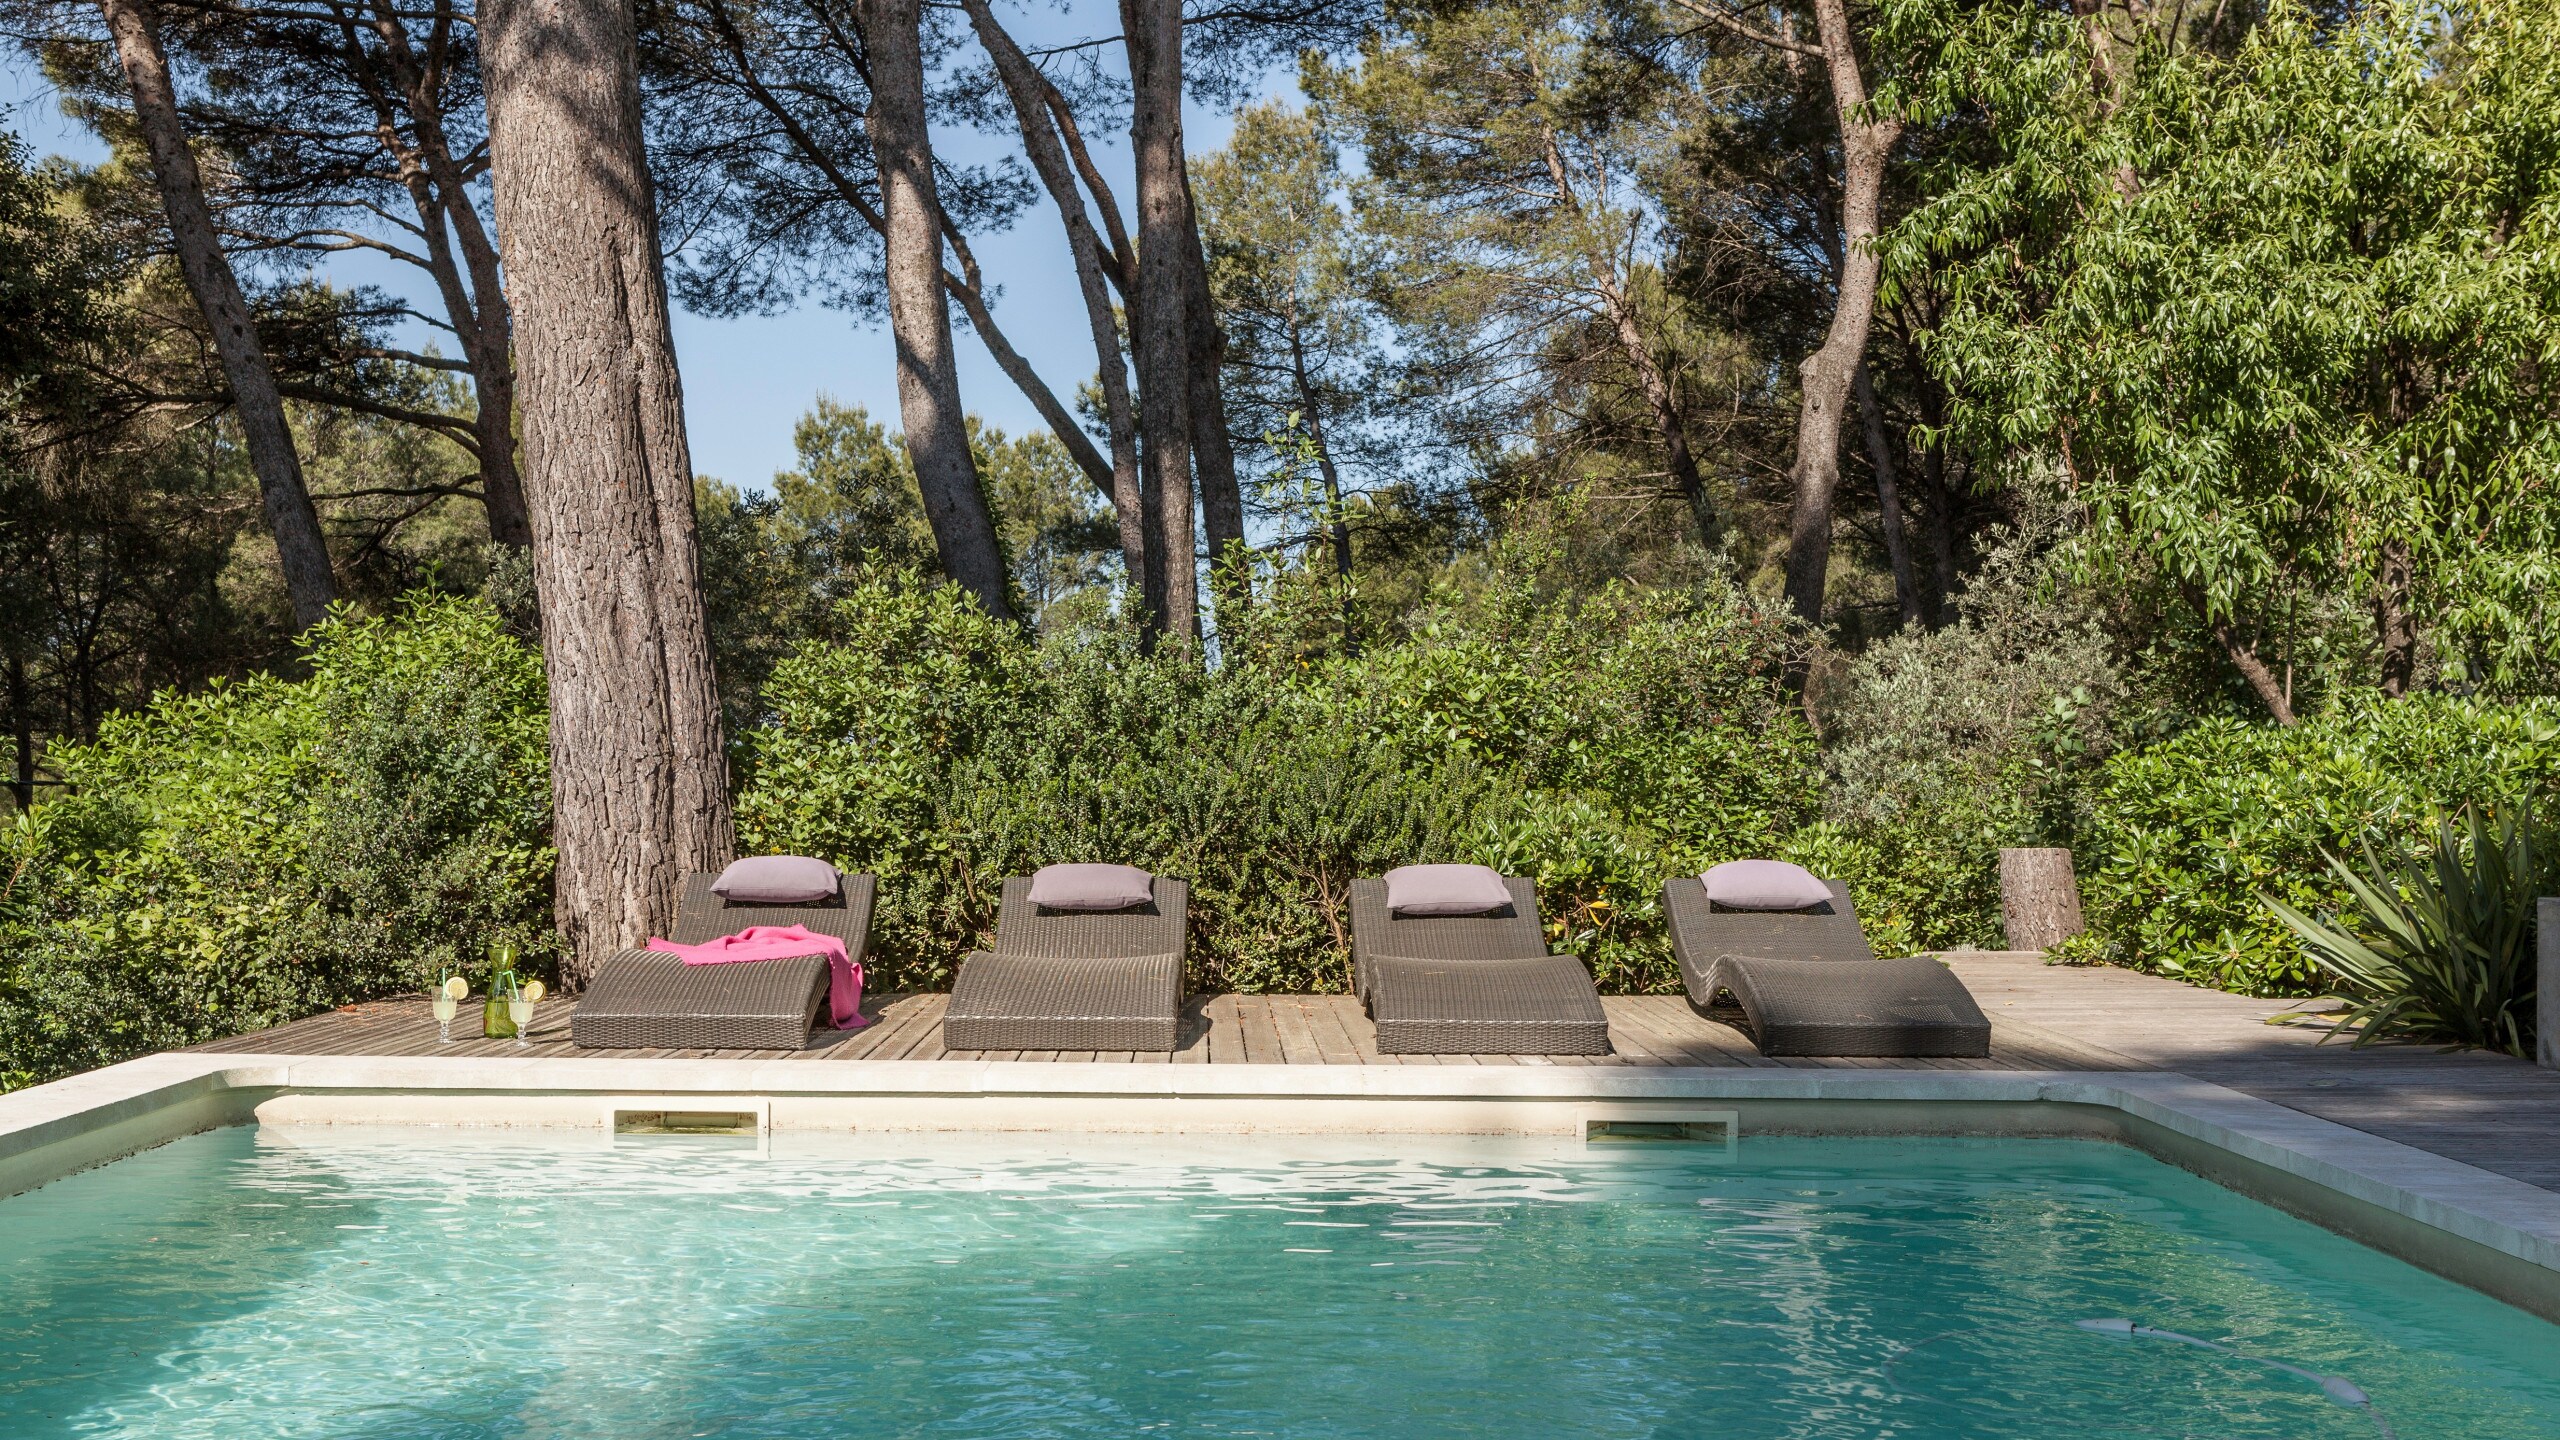 Property Image 2 - Stunning 4-bedroom villa in the heart of Provence